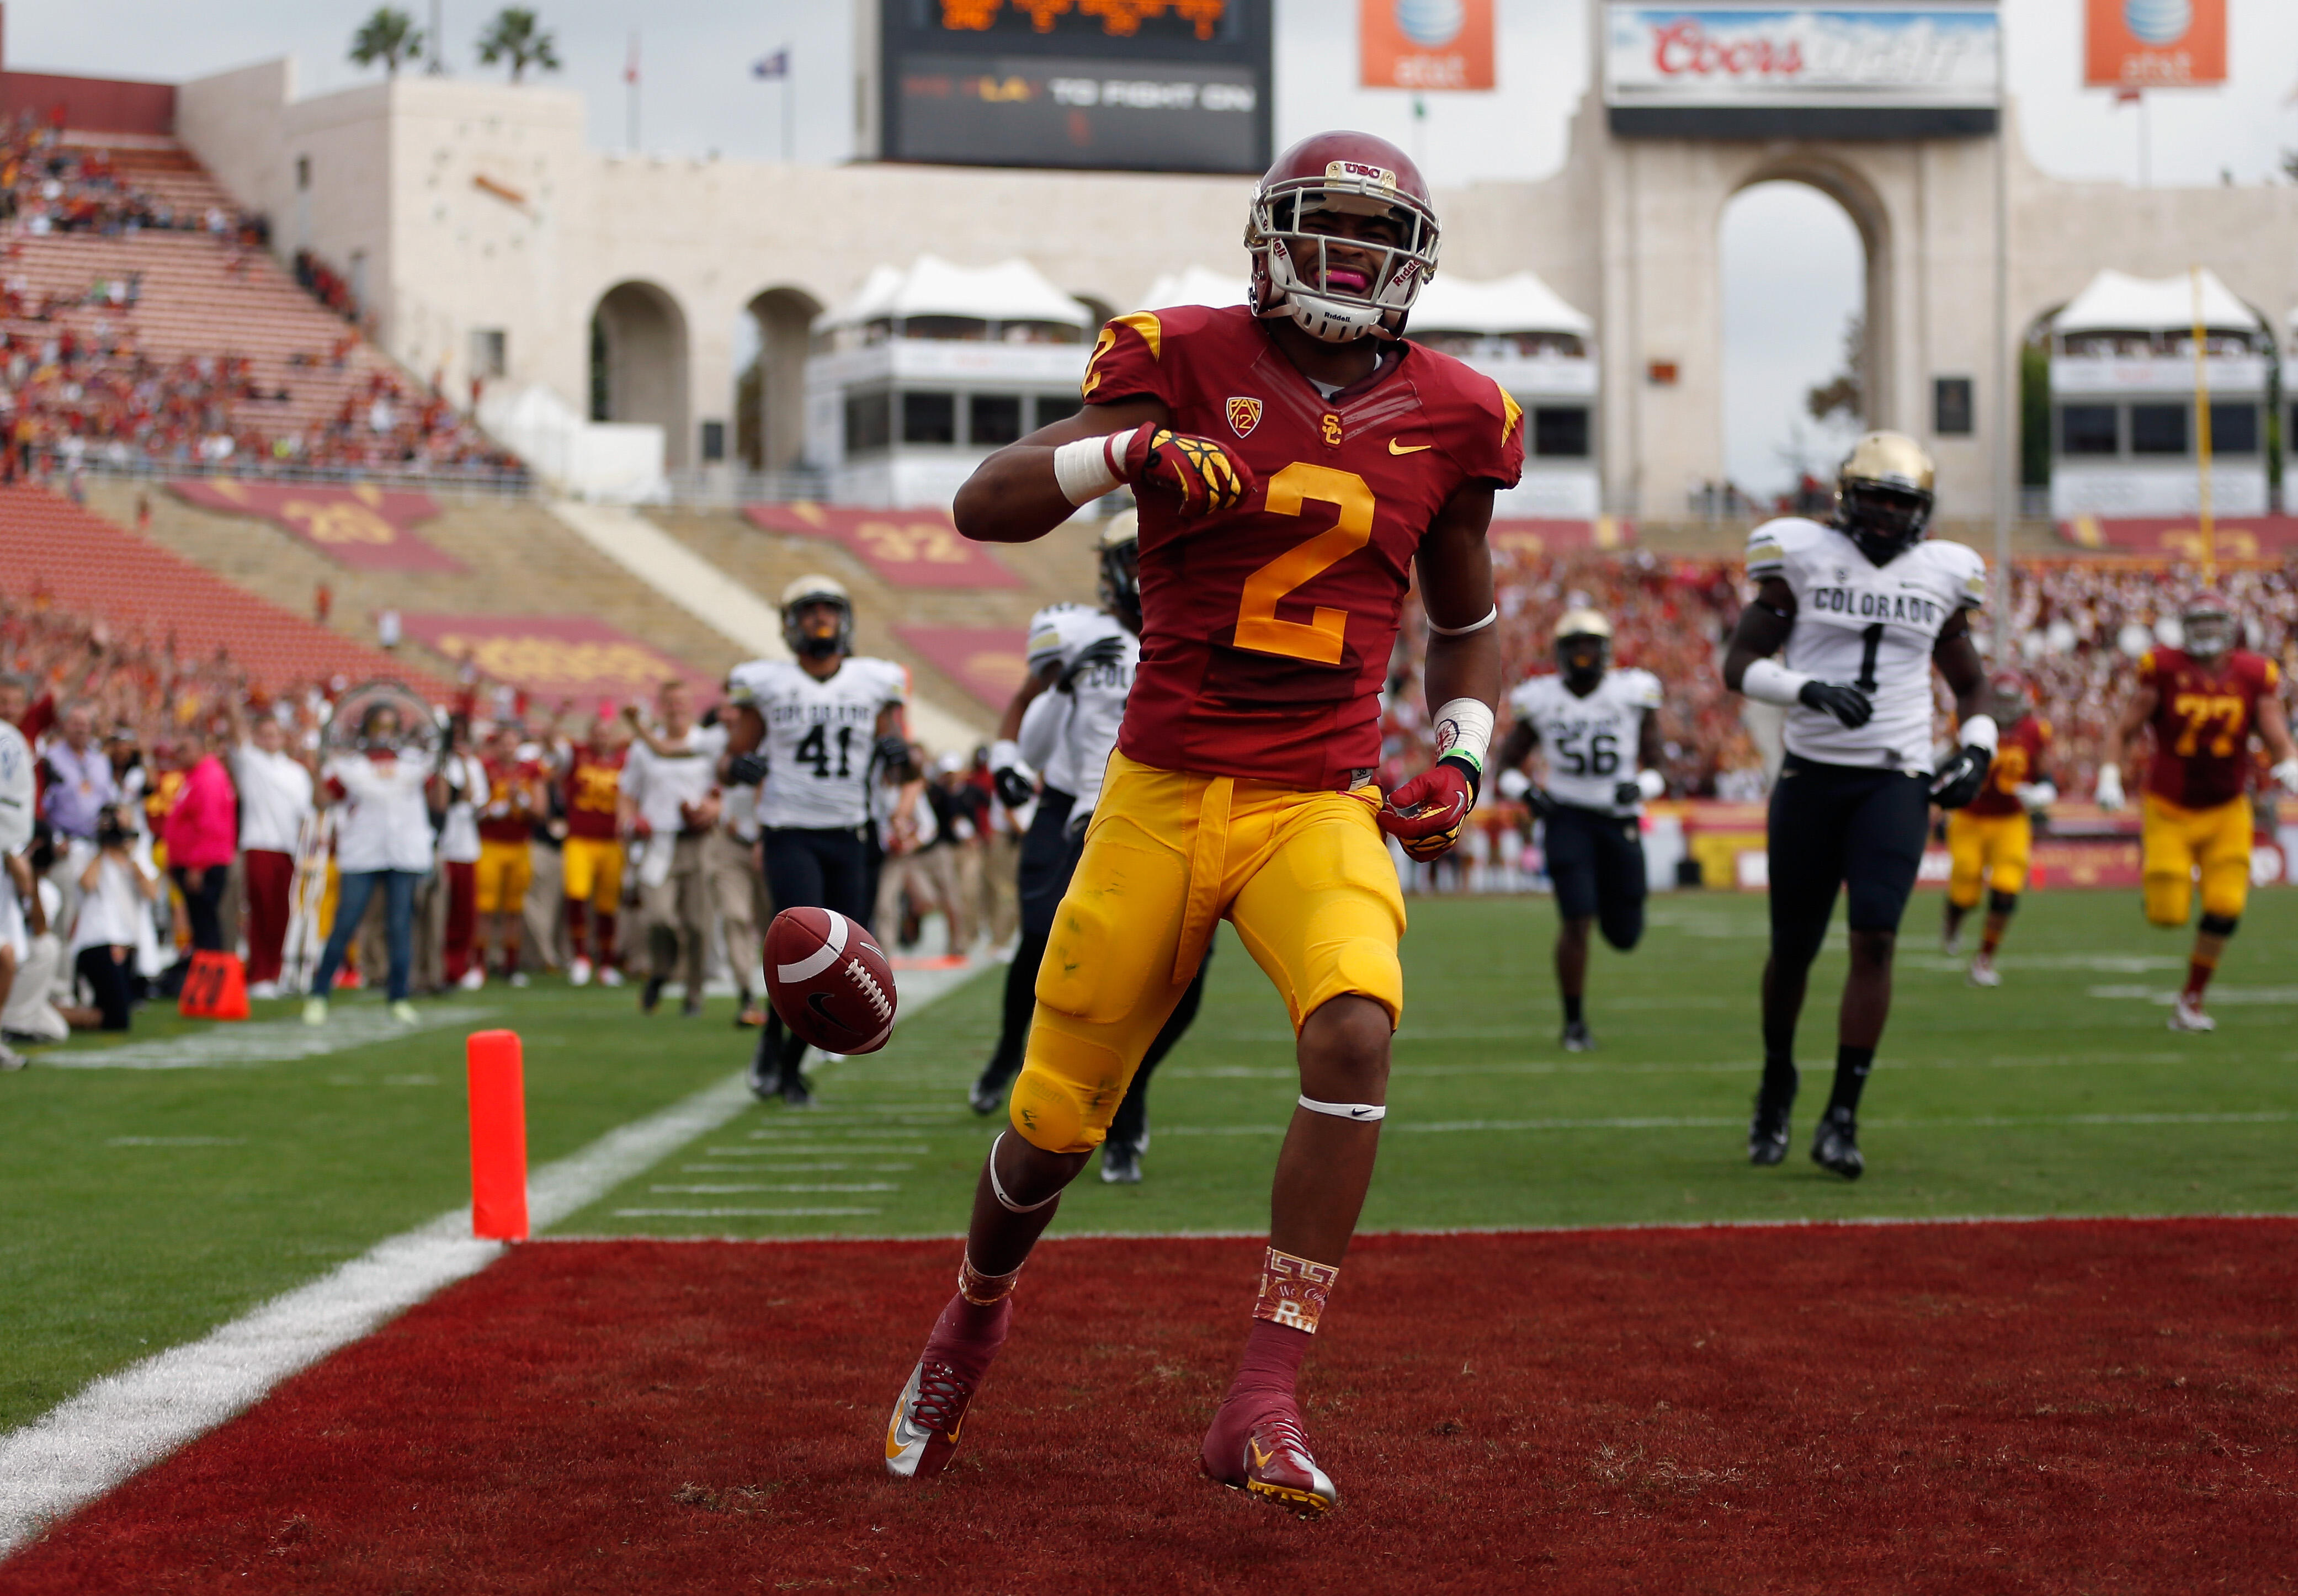 LOS ANGELES, CA - OCTOBER 20:  Wide receiver Robert Woods #2 of the USC Trojans celebrates a touchdown in the first quarter against the Colorado Buffaloes at Los Angeles Memorial Coliseum on October 20, 2012 in Los Angeles, California. USC defeated Colora